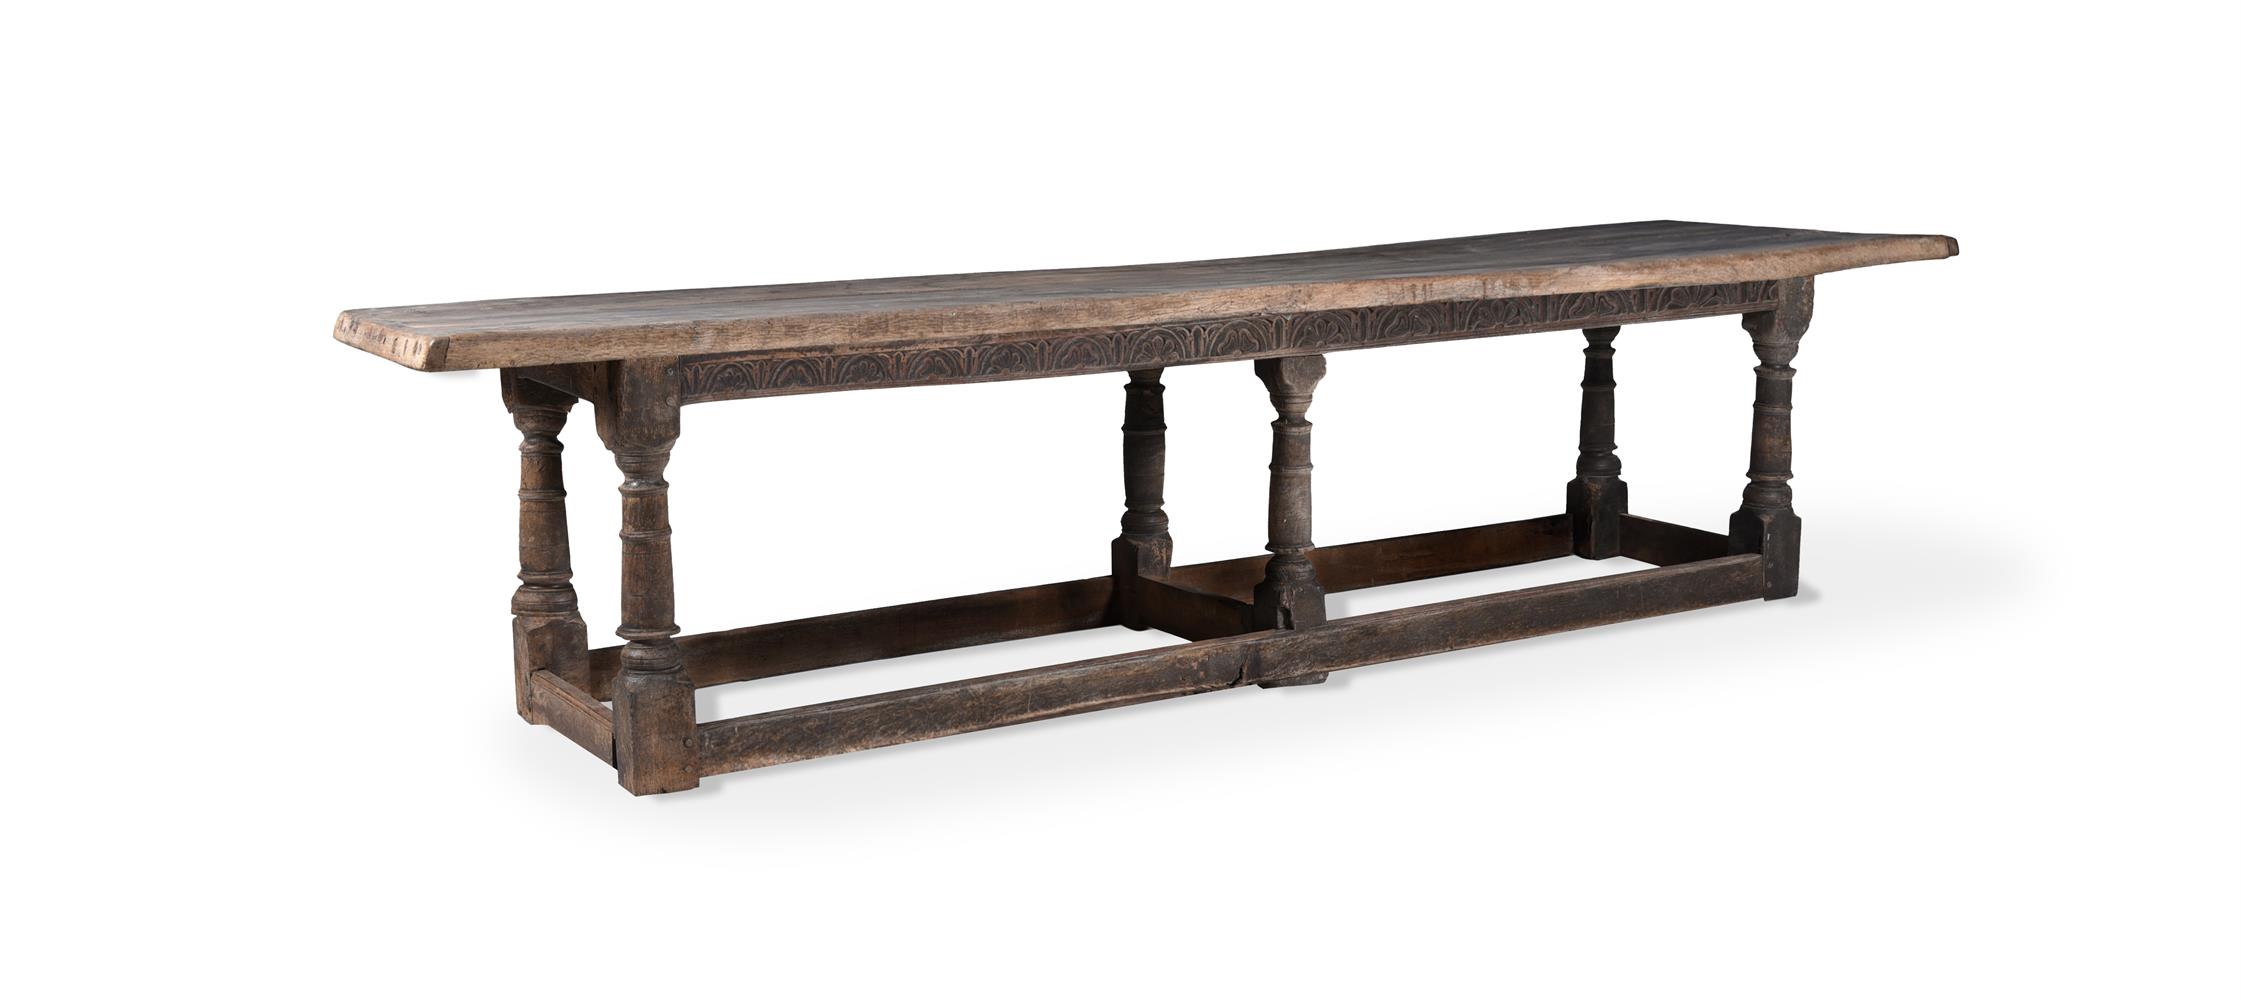 AN OAK PLANK TOP REFECTORY TABLE, 17TH CENTURY